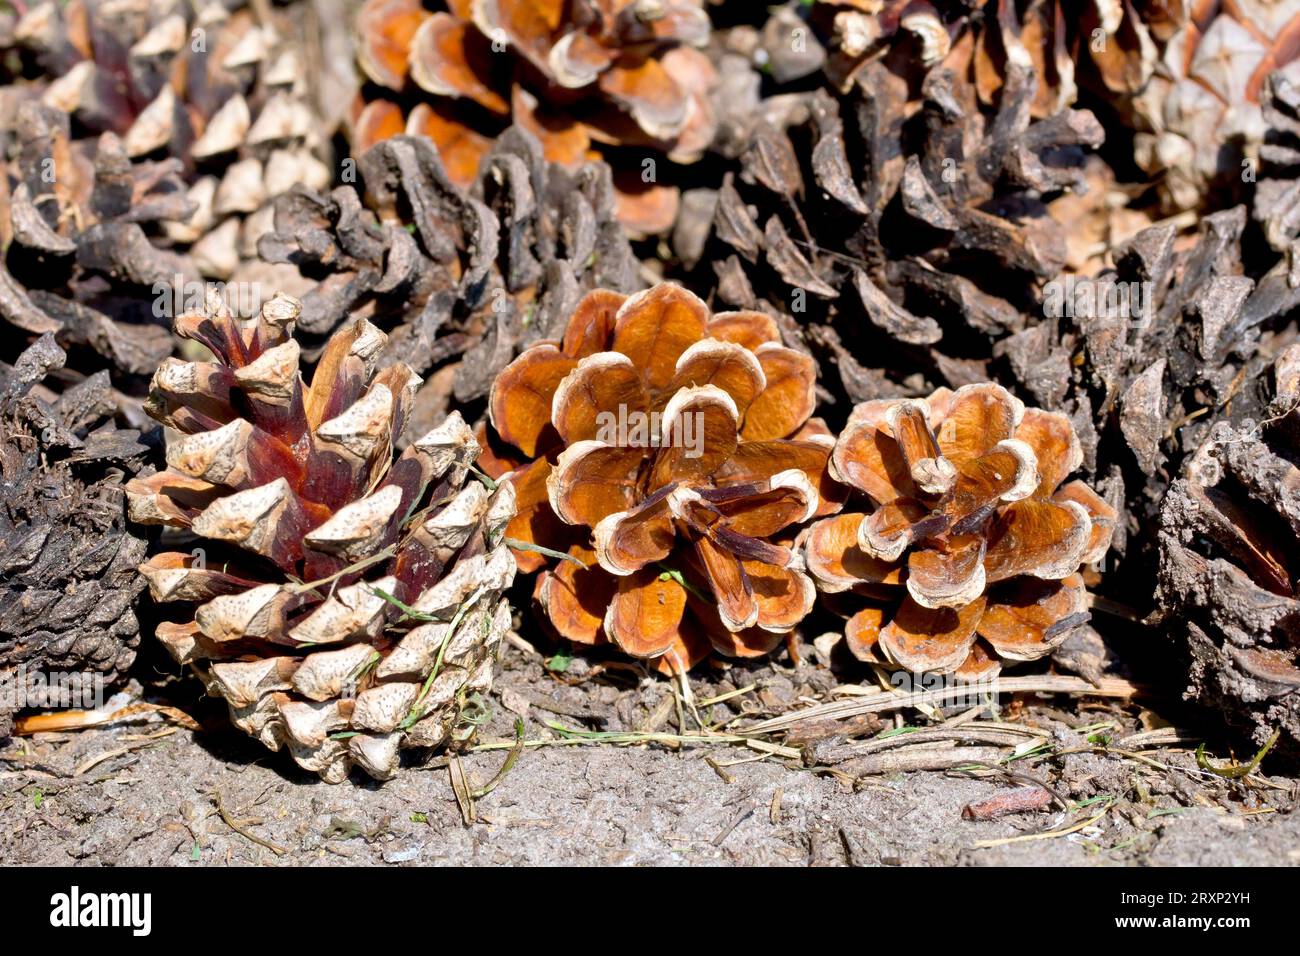 Scot's Pine (pinus sylvestris), close up showing a cluster of old mature pine cones laying on the dirt beneath the tree from which they have fallen. Stock Photo